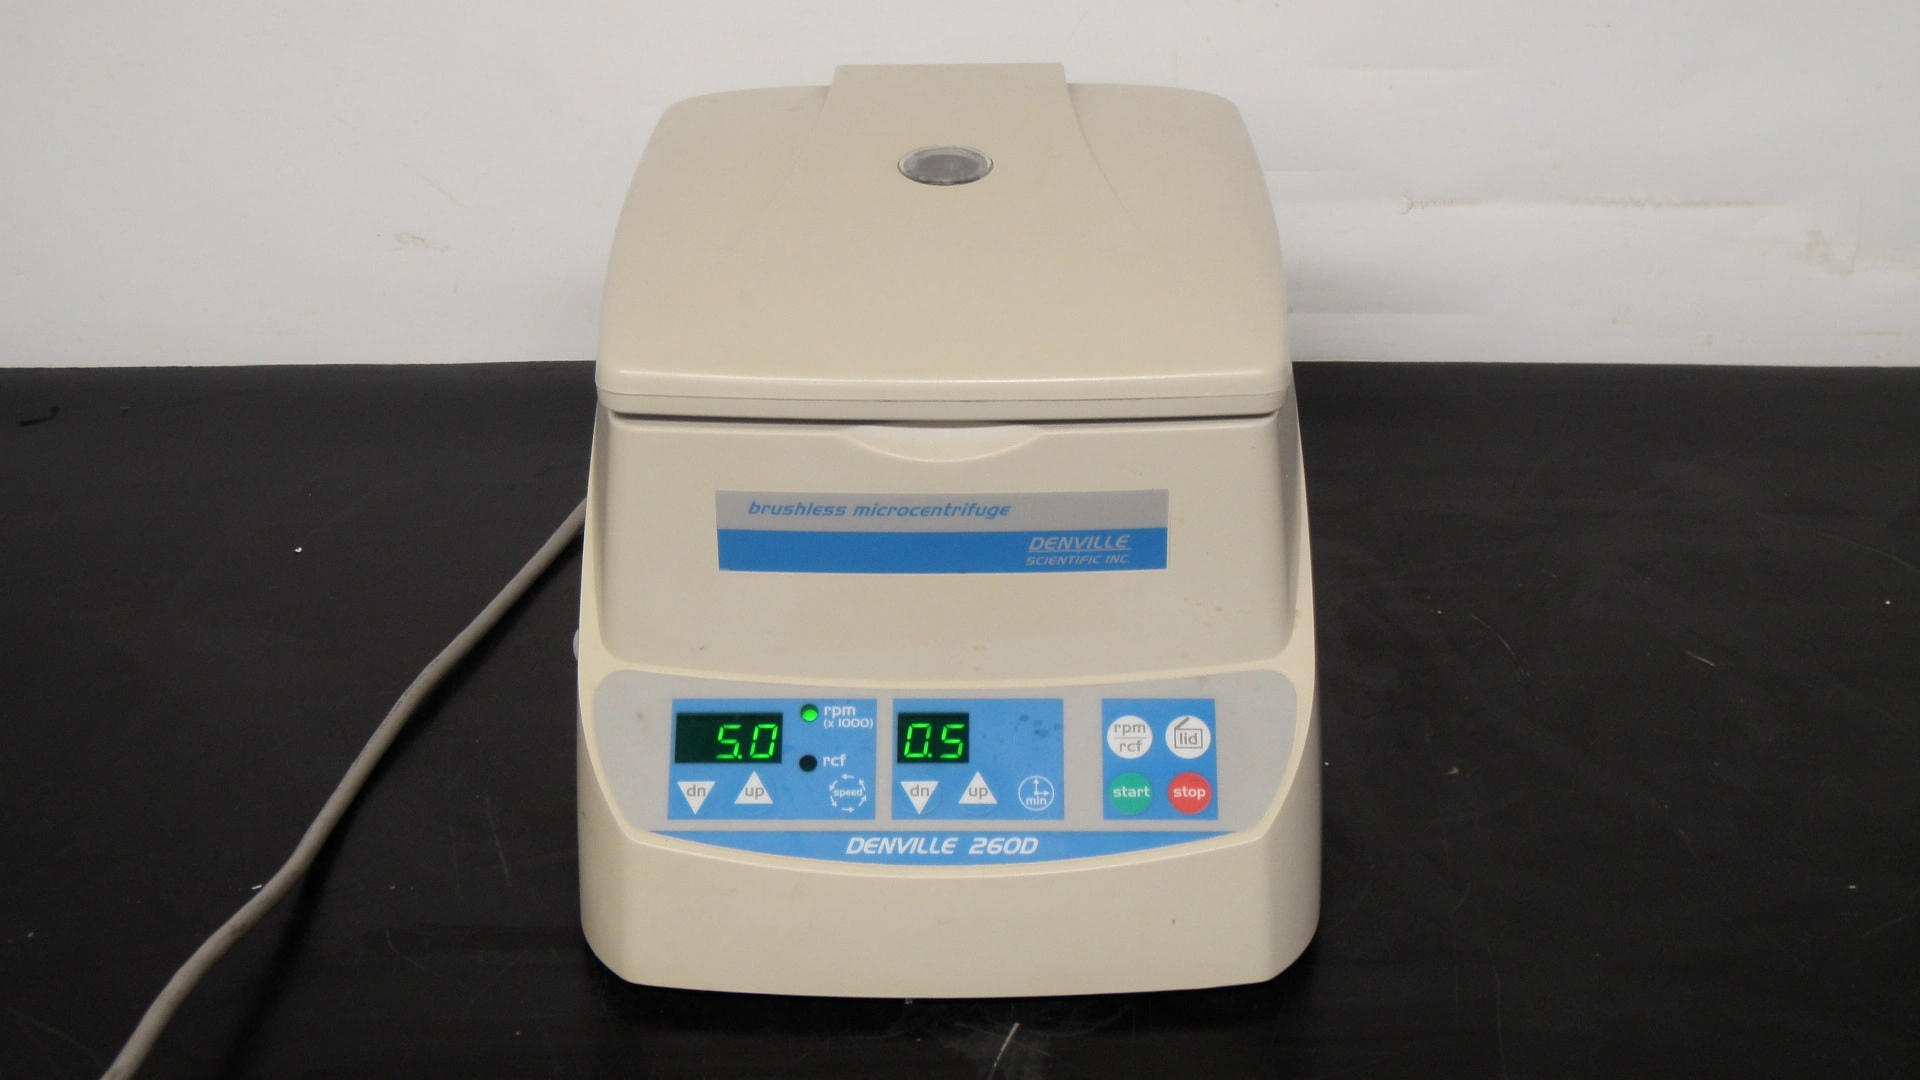 Denville  260D Brushless Micro Centrifuge, Tested and Works!